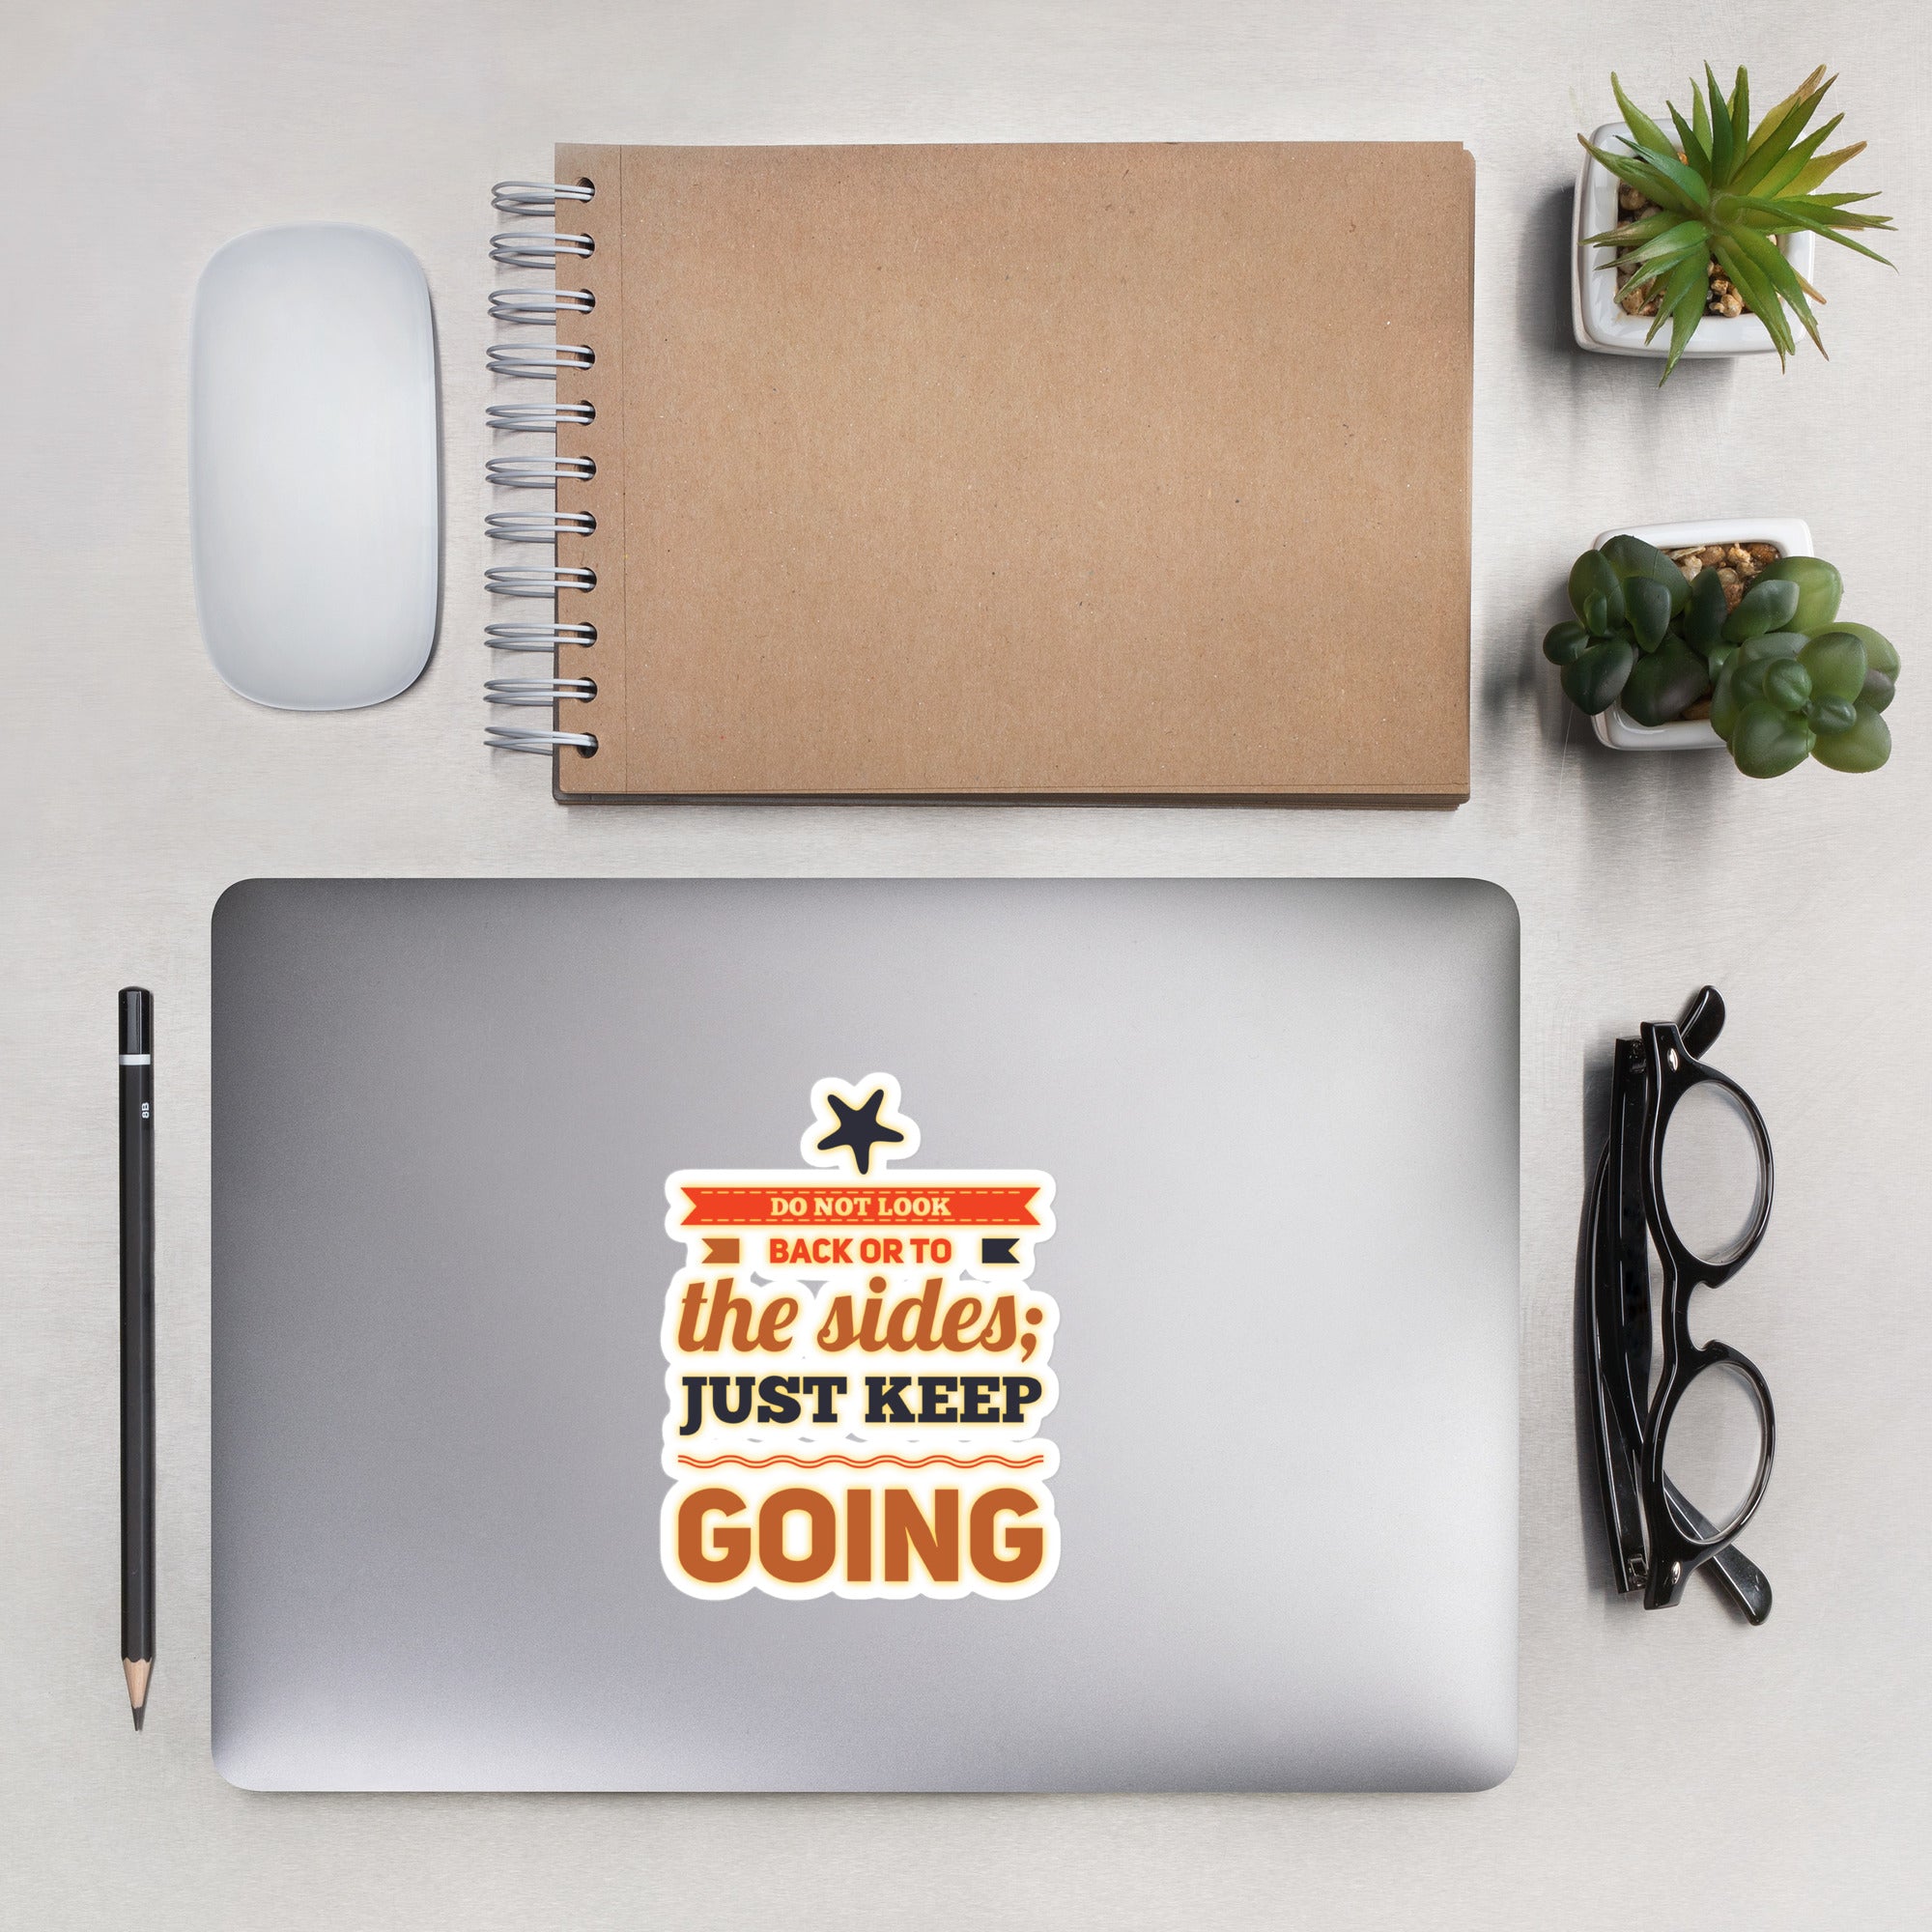 GloWell Designs - Bubble-Free Stickers - Motivational Quote - Just Keep Going - GloWell Designs